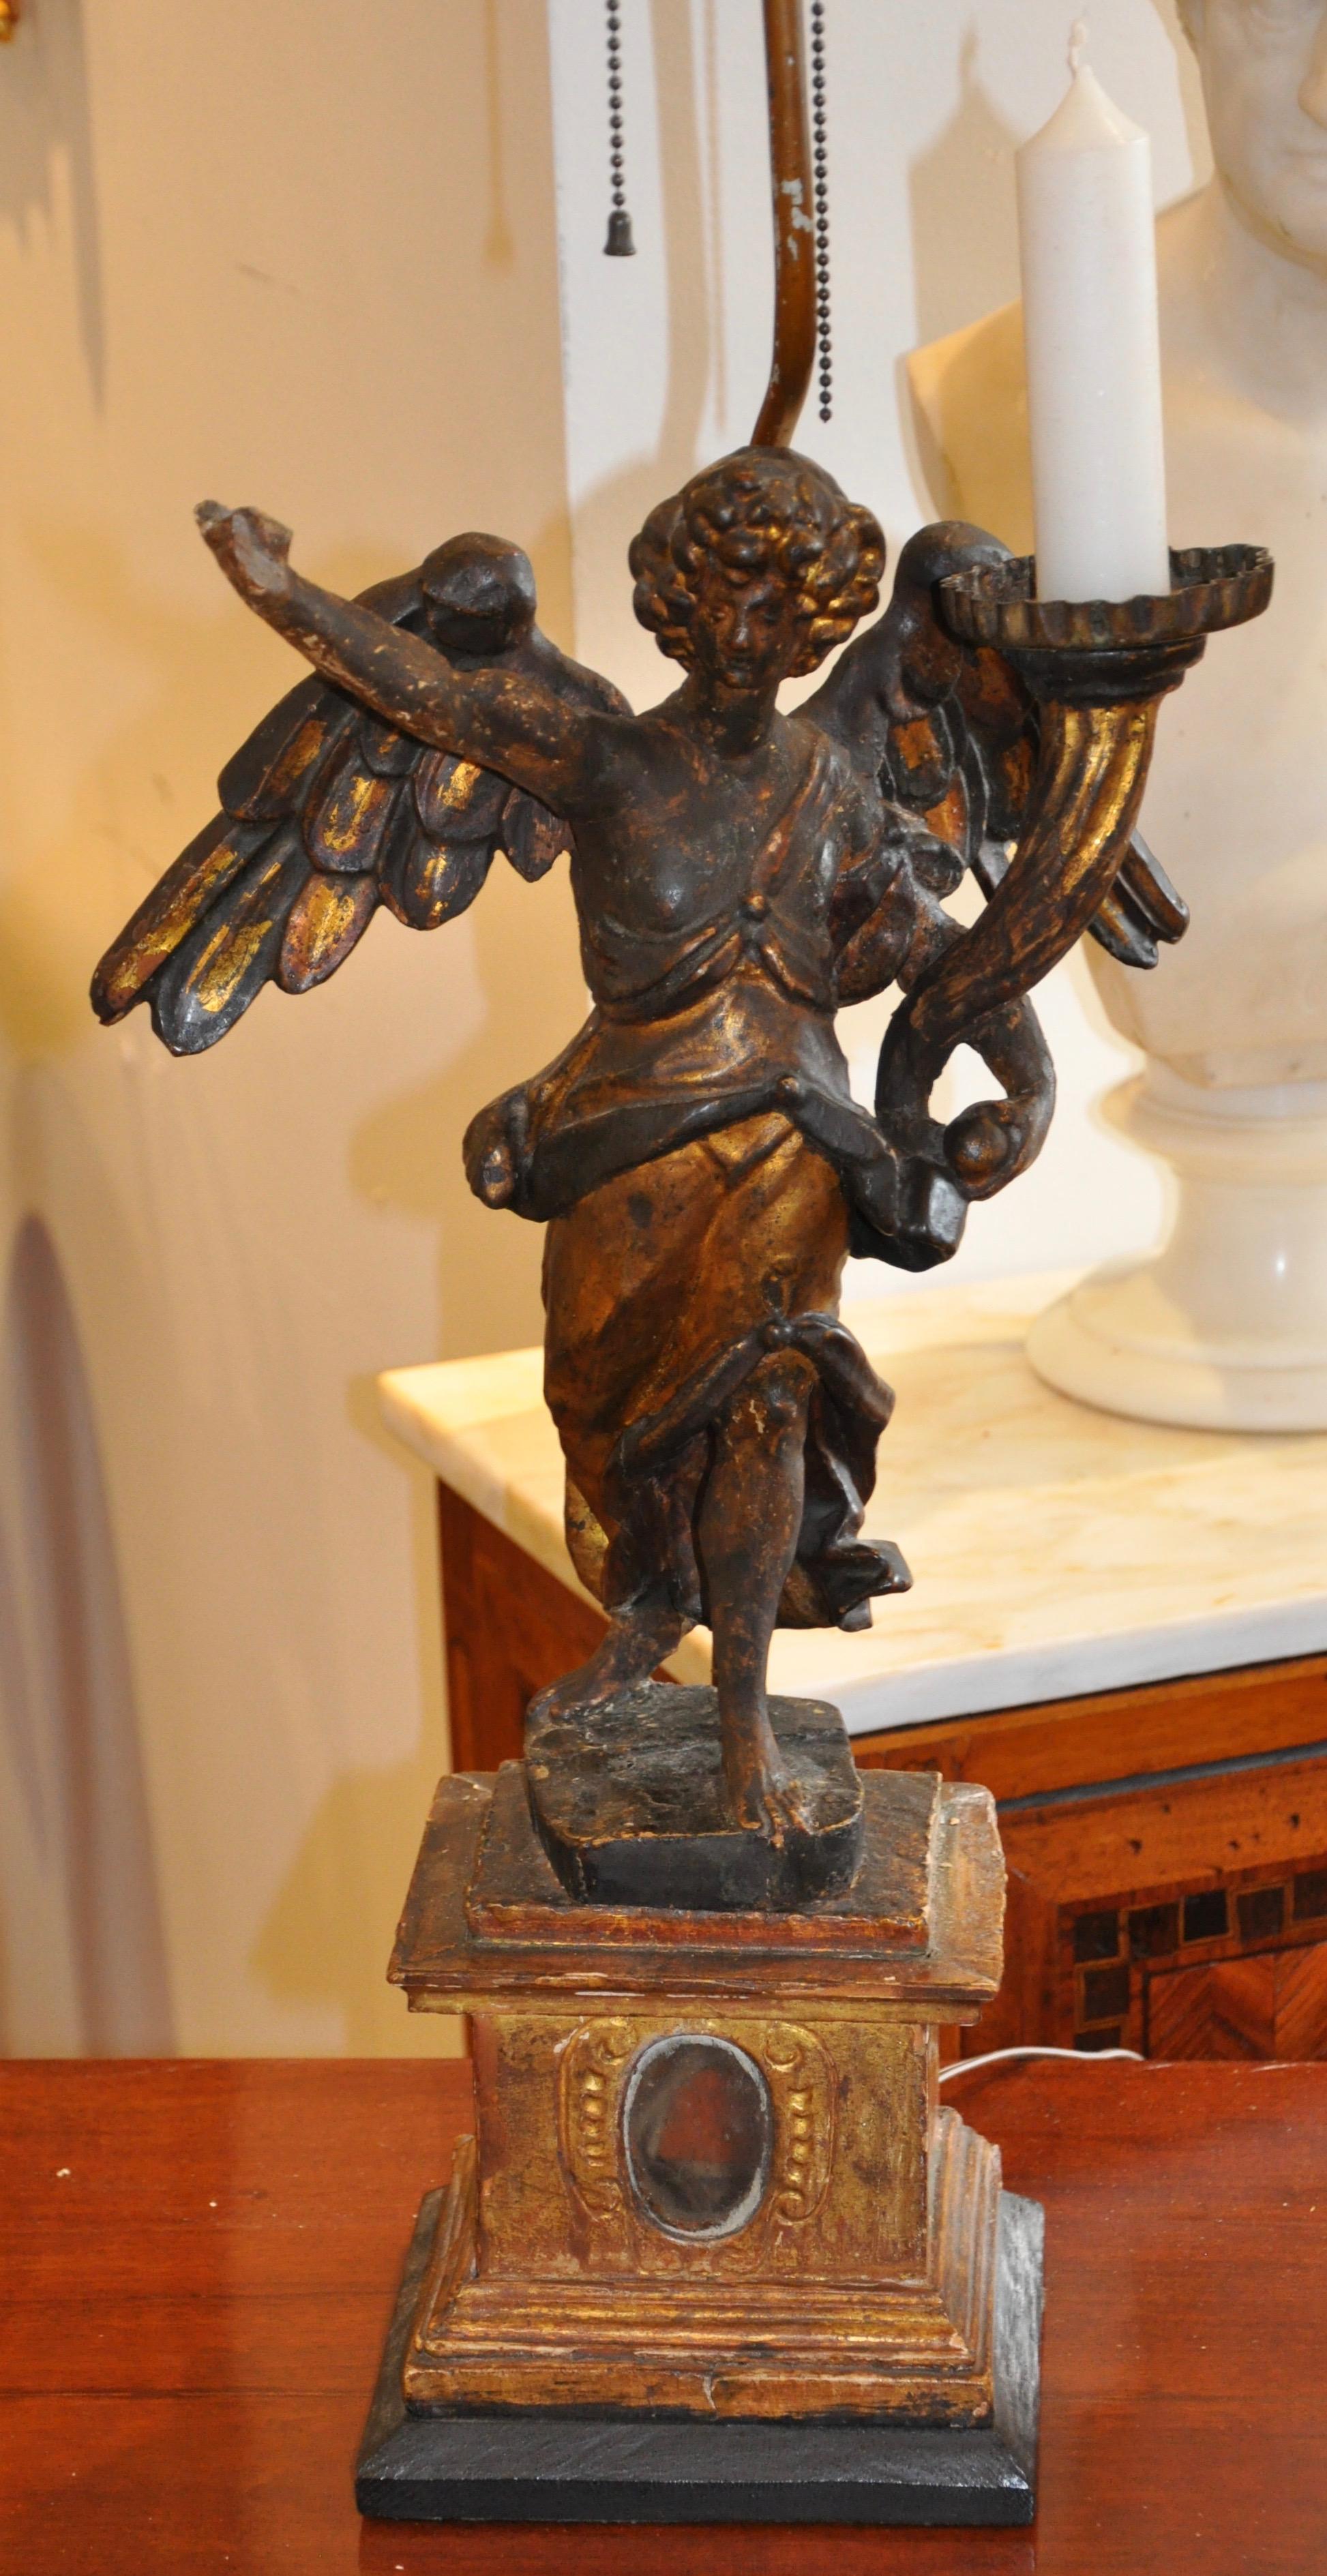 Pair of Italian Carved Wood and Gilt Angel Reliquary Pricket Candelabra as Lamps In Good Condition For Sale In Essex, MA